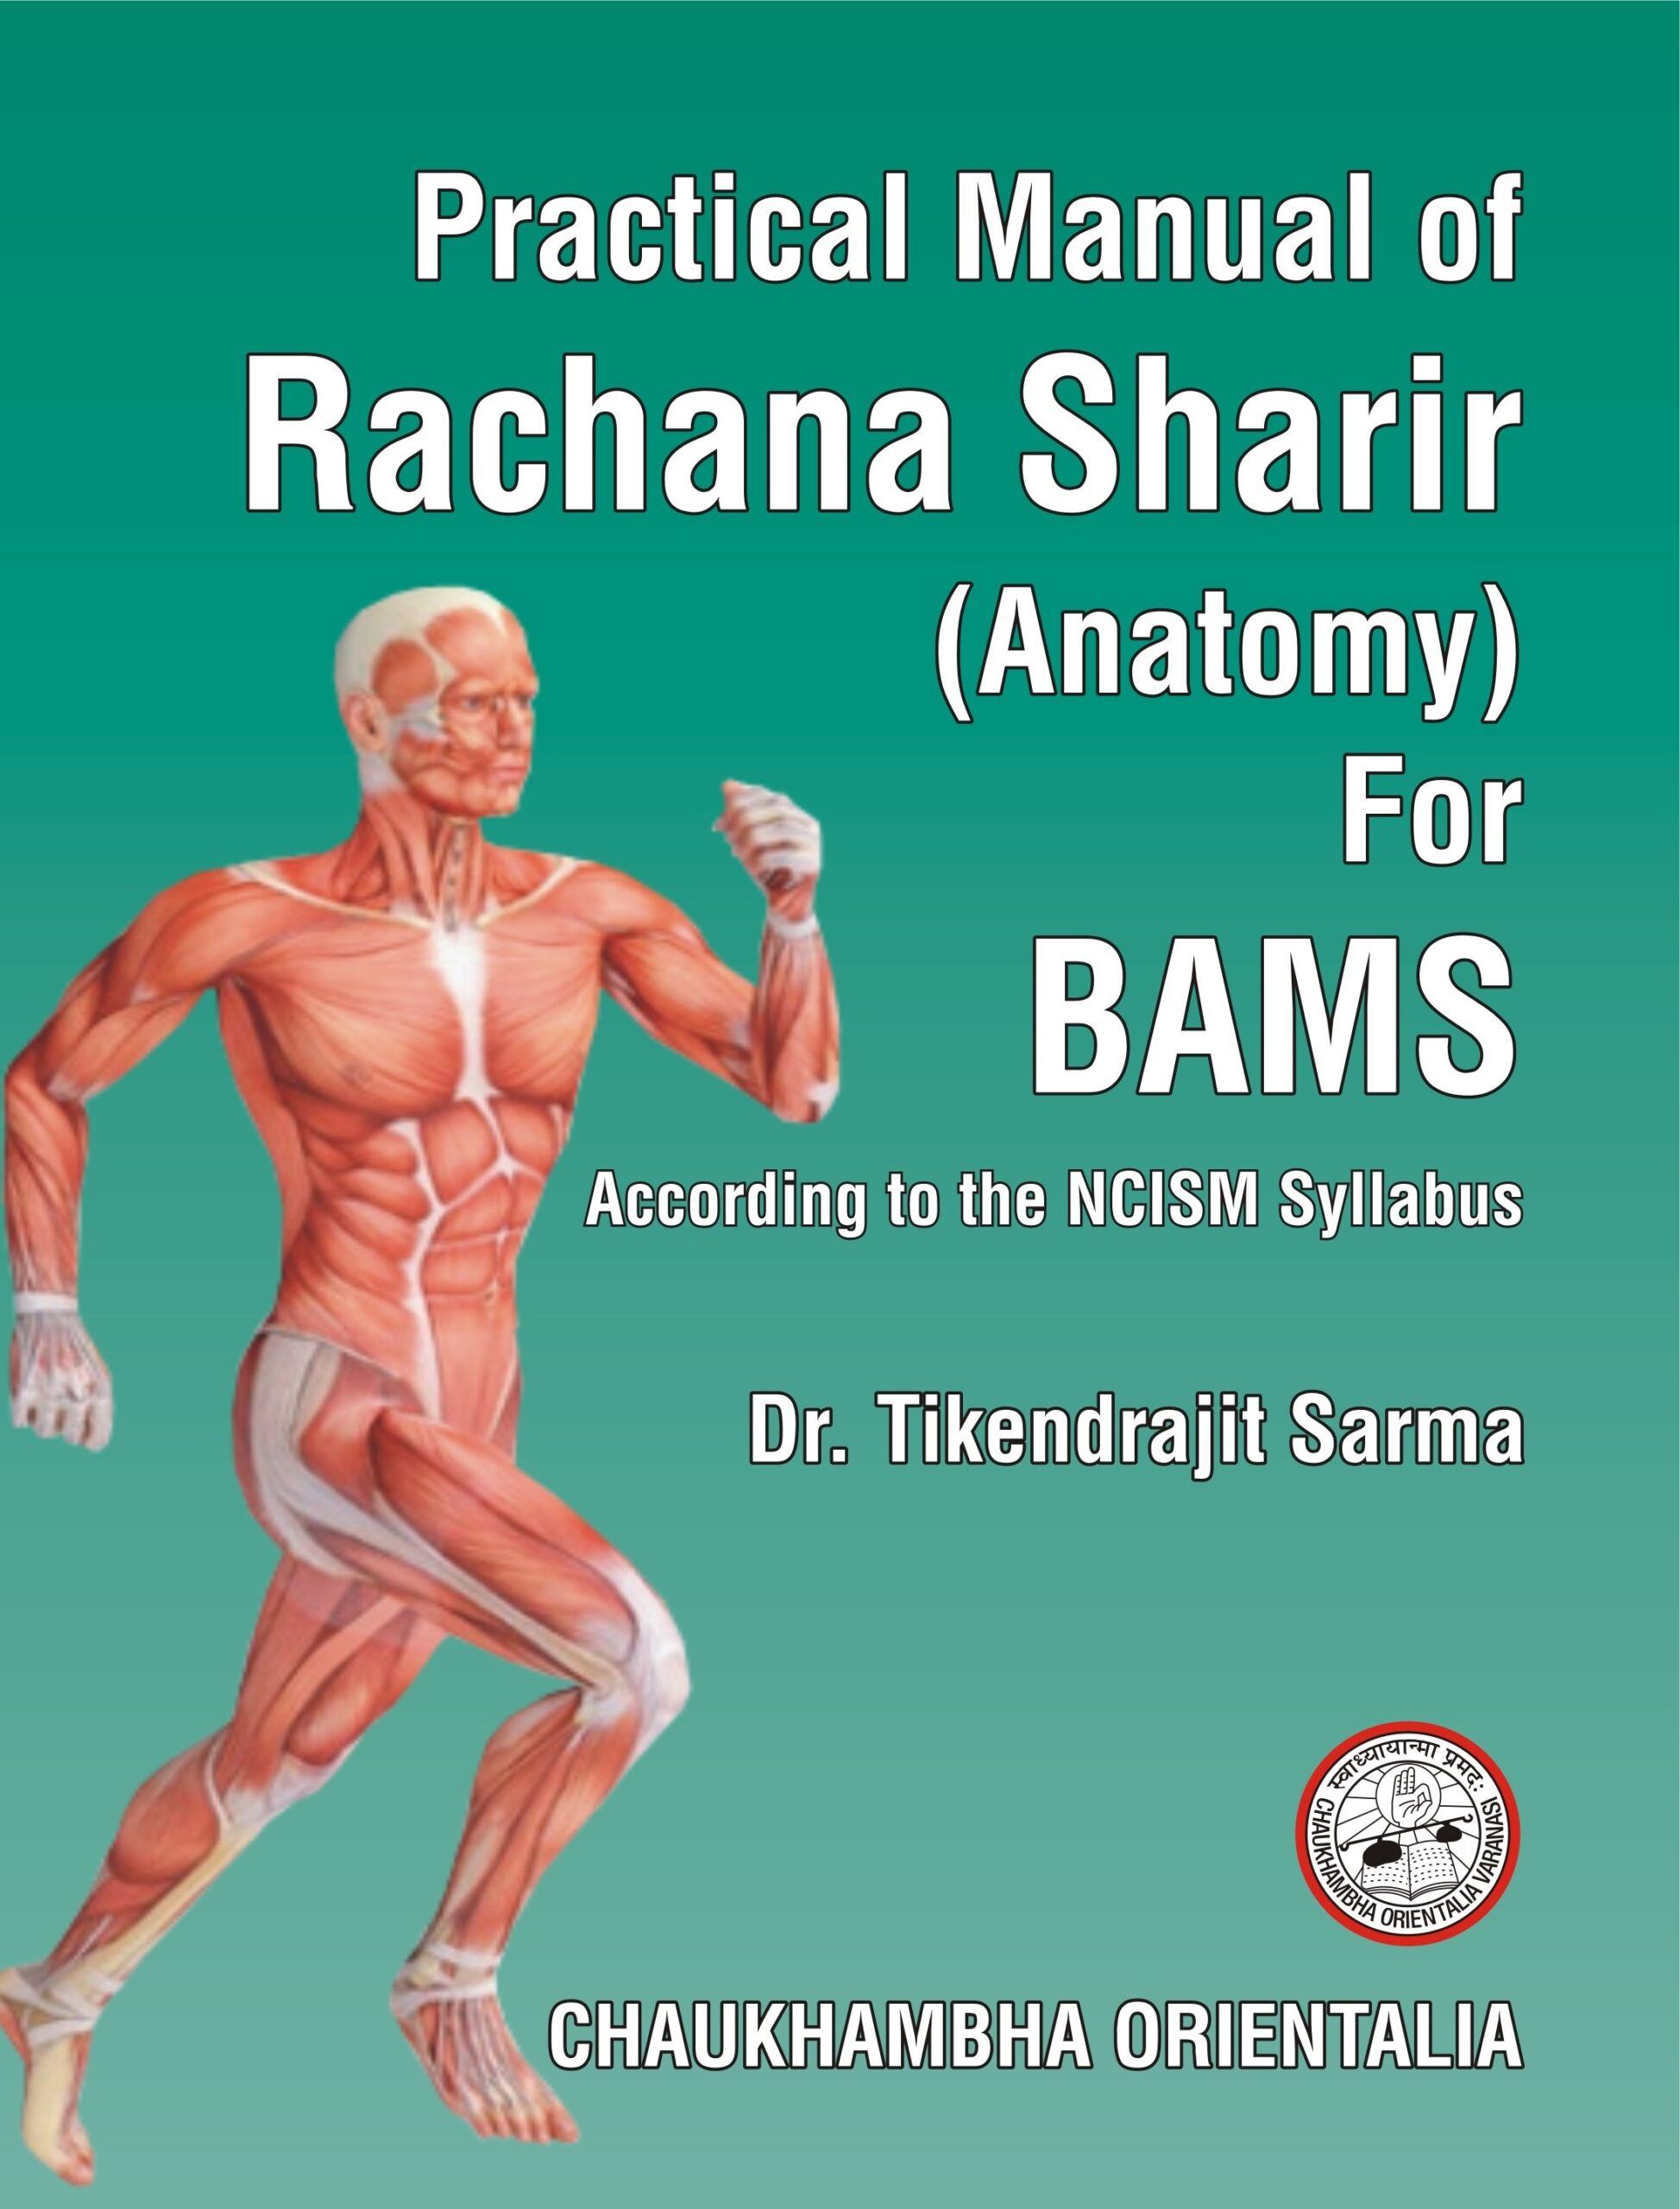 This is the front side of the cover page of the book Practical Manual of Rachana Sharira (Anatomy) for BAMS written by Dr. Tikendrajit. It contains a muscular image of the body in a sprint position along with the name of the book. The background is a green-ish tone with a white gradient from bottom to top. The name of the publisher, Chaukhambha Orientalia, is mentioned in the bottom right corner.